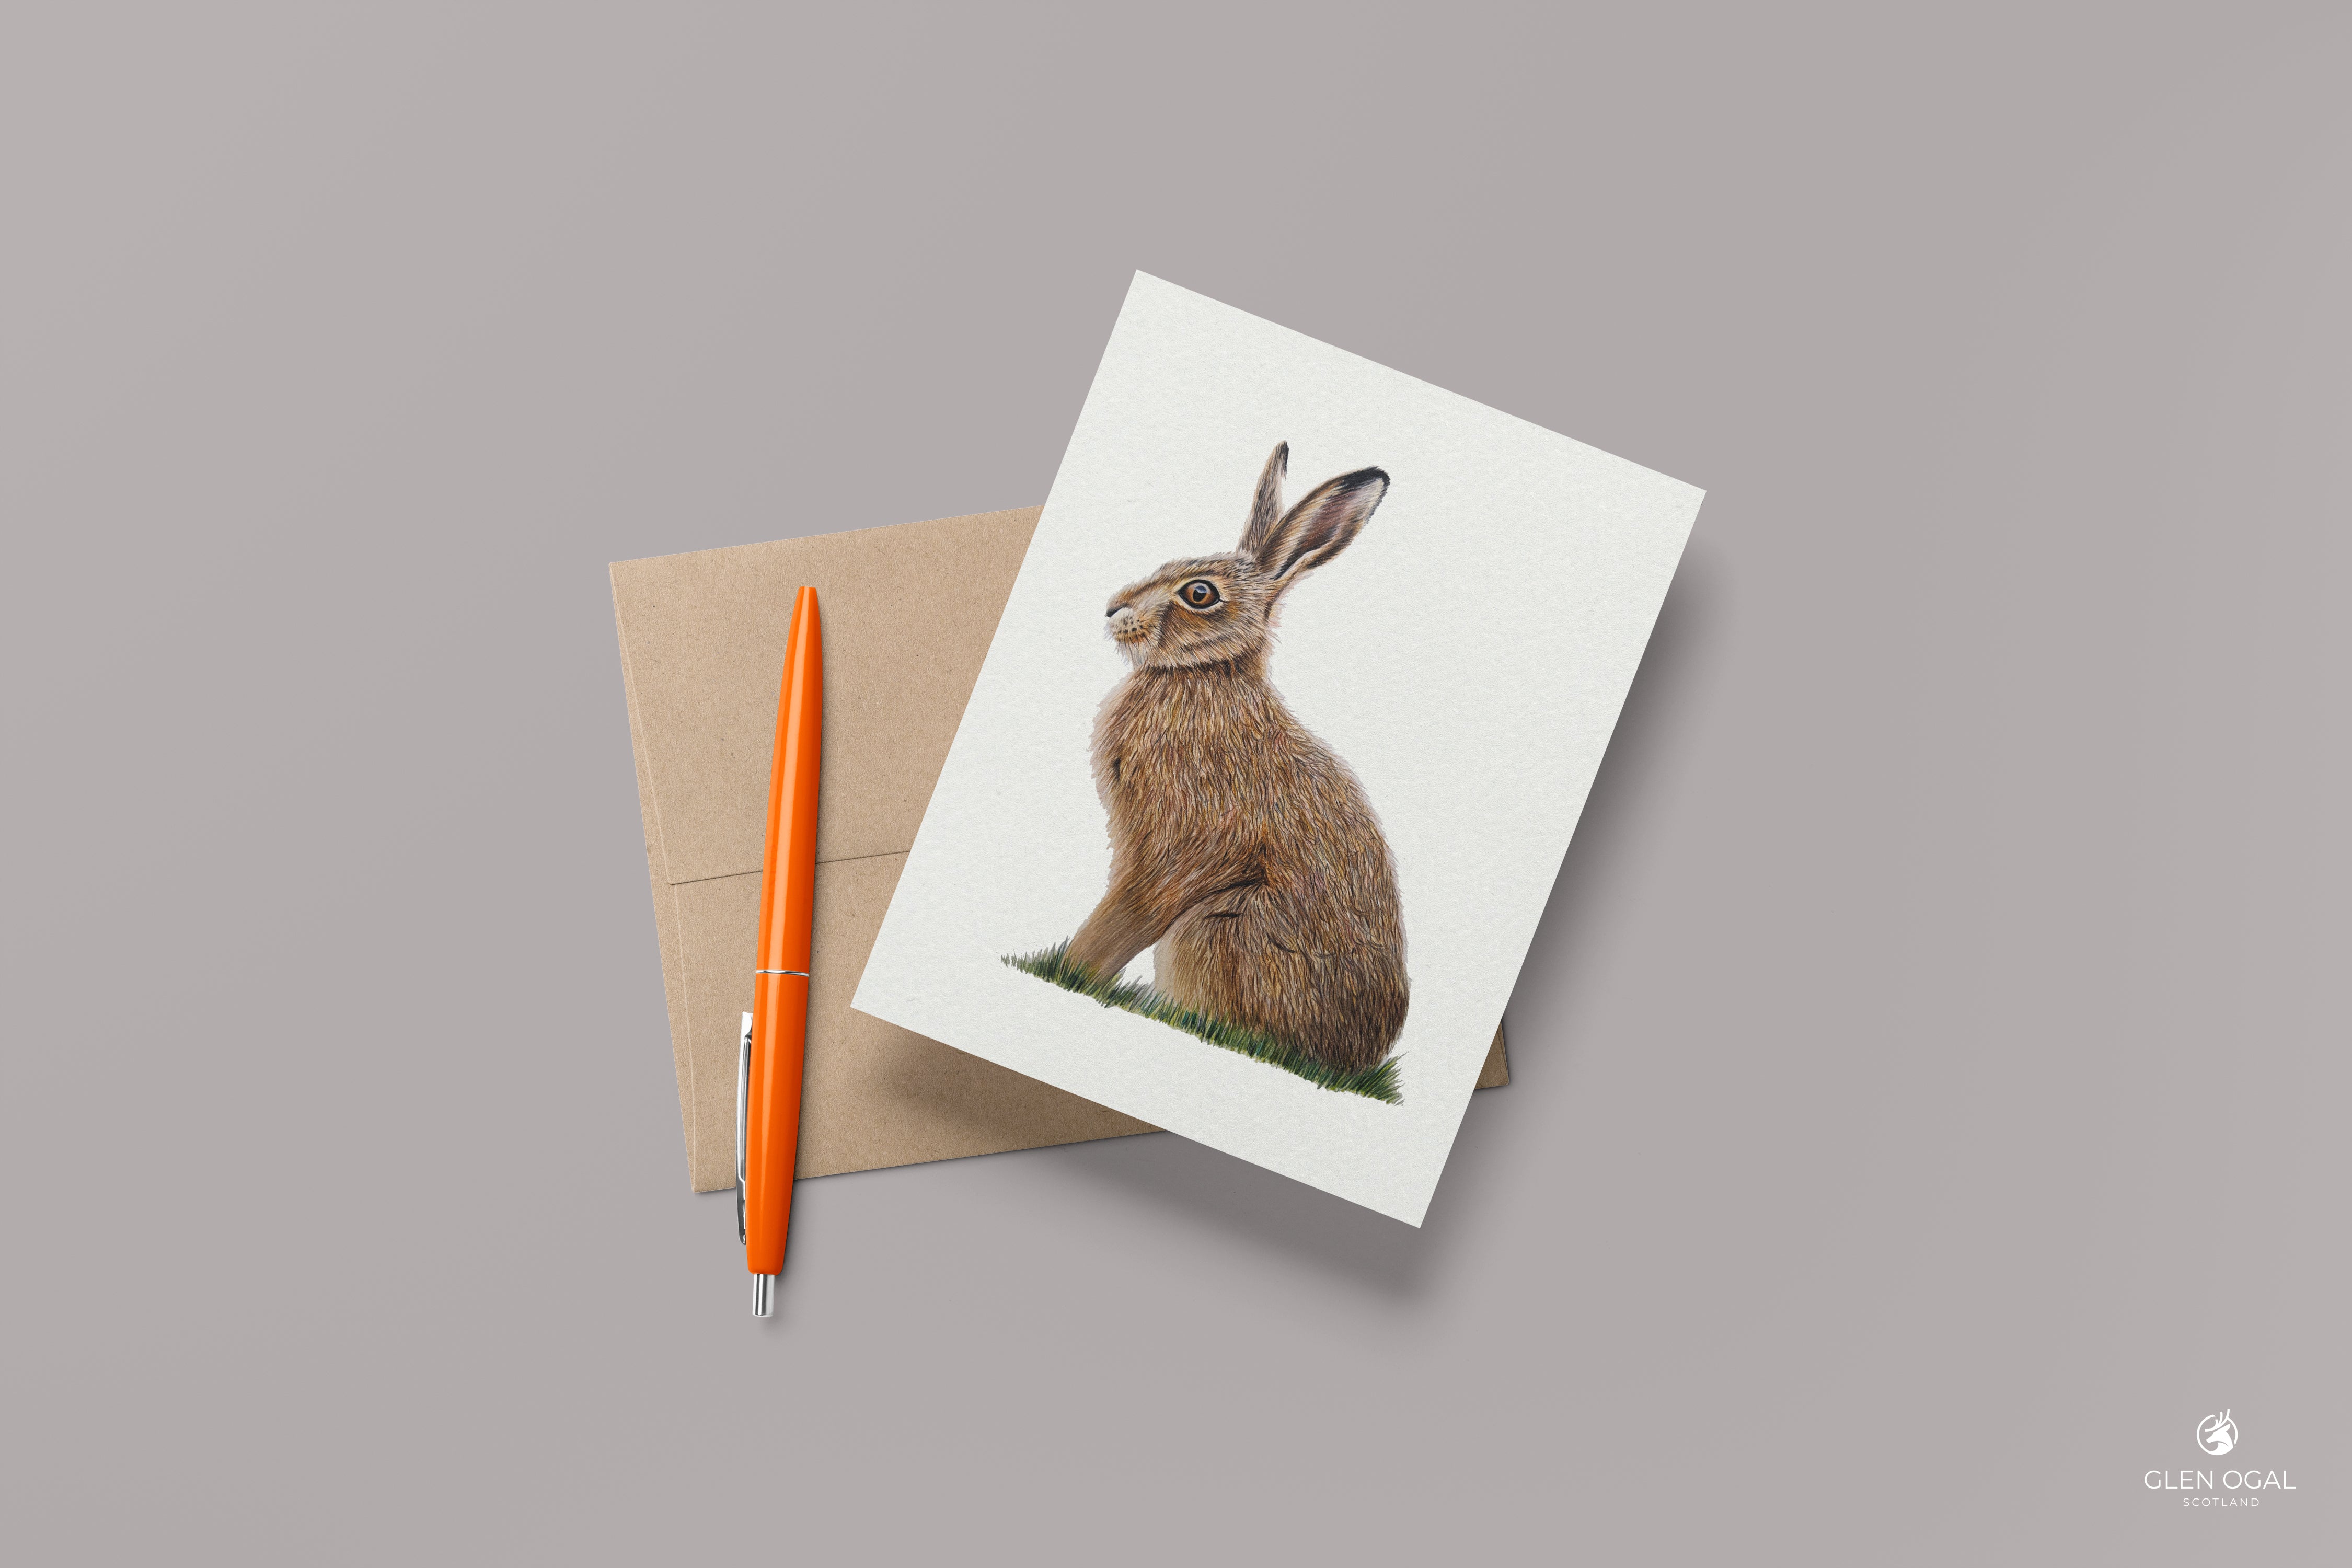 Pack of 5 Wild Hare Note Cards